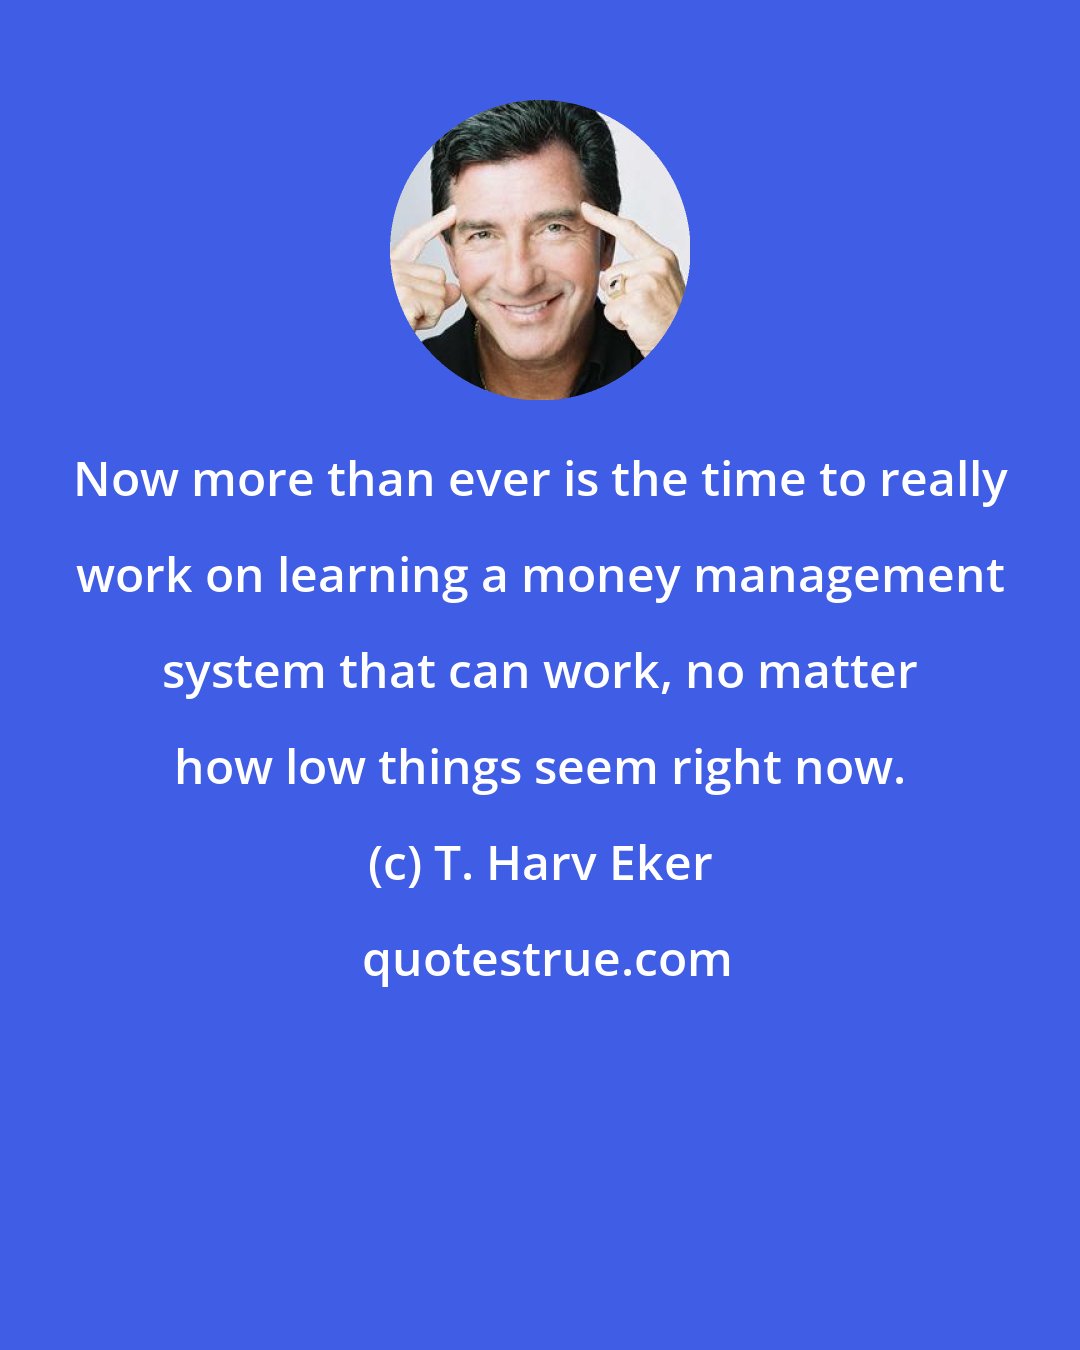 T. Harv Eker: Now more than ever is the time to really work on learning a money management system that can work, no matter how low things seem right now.